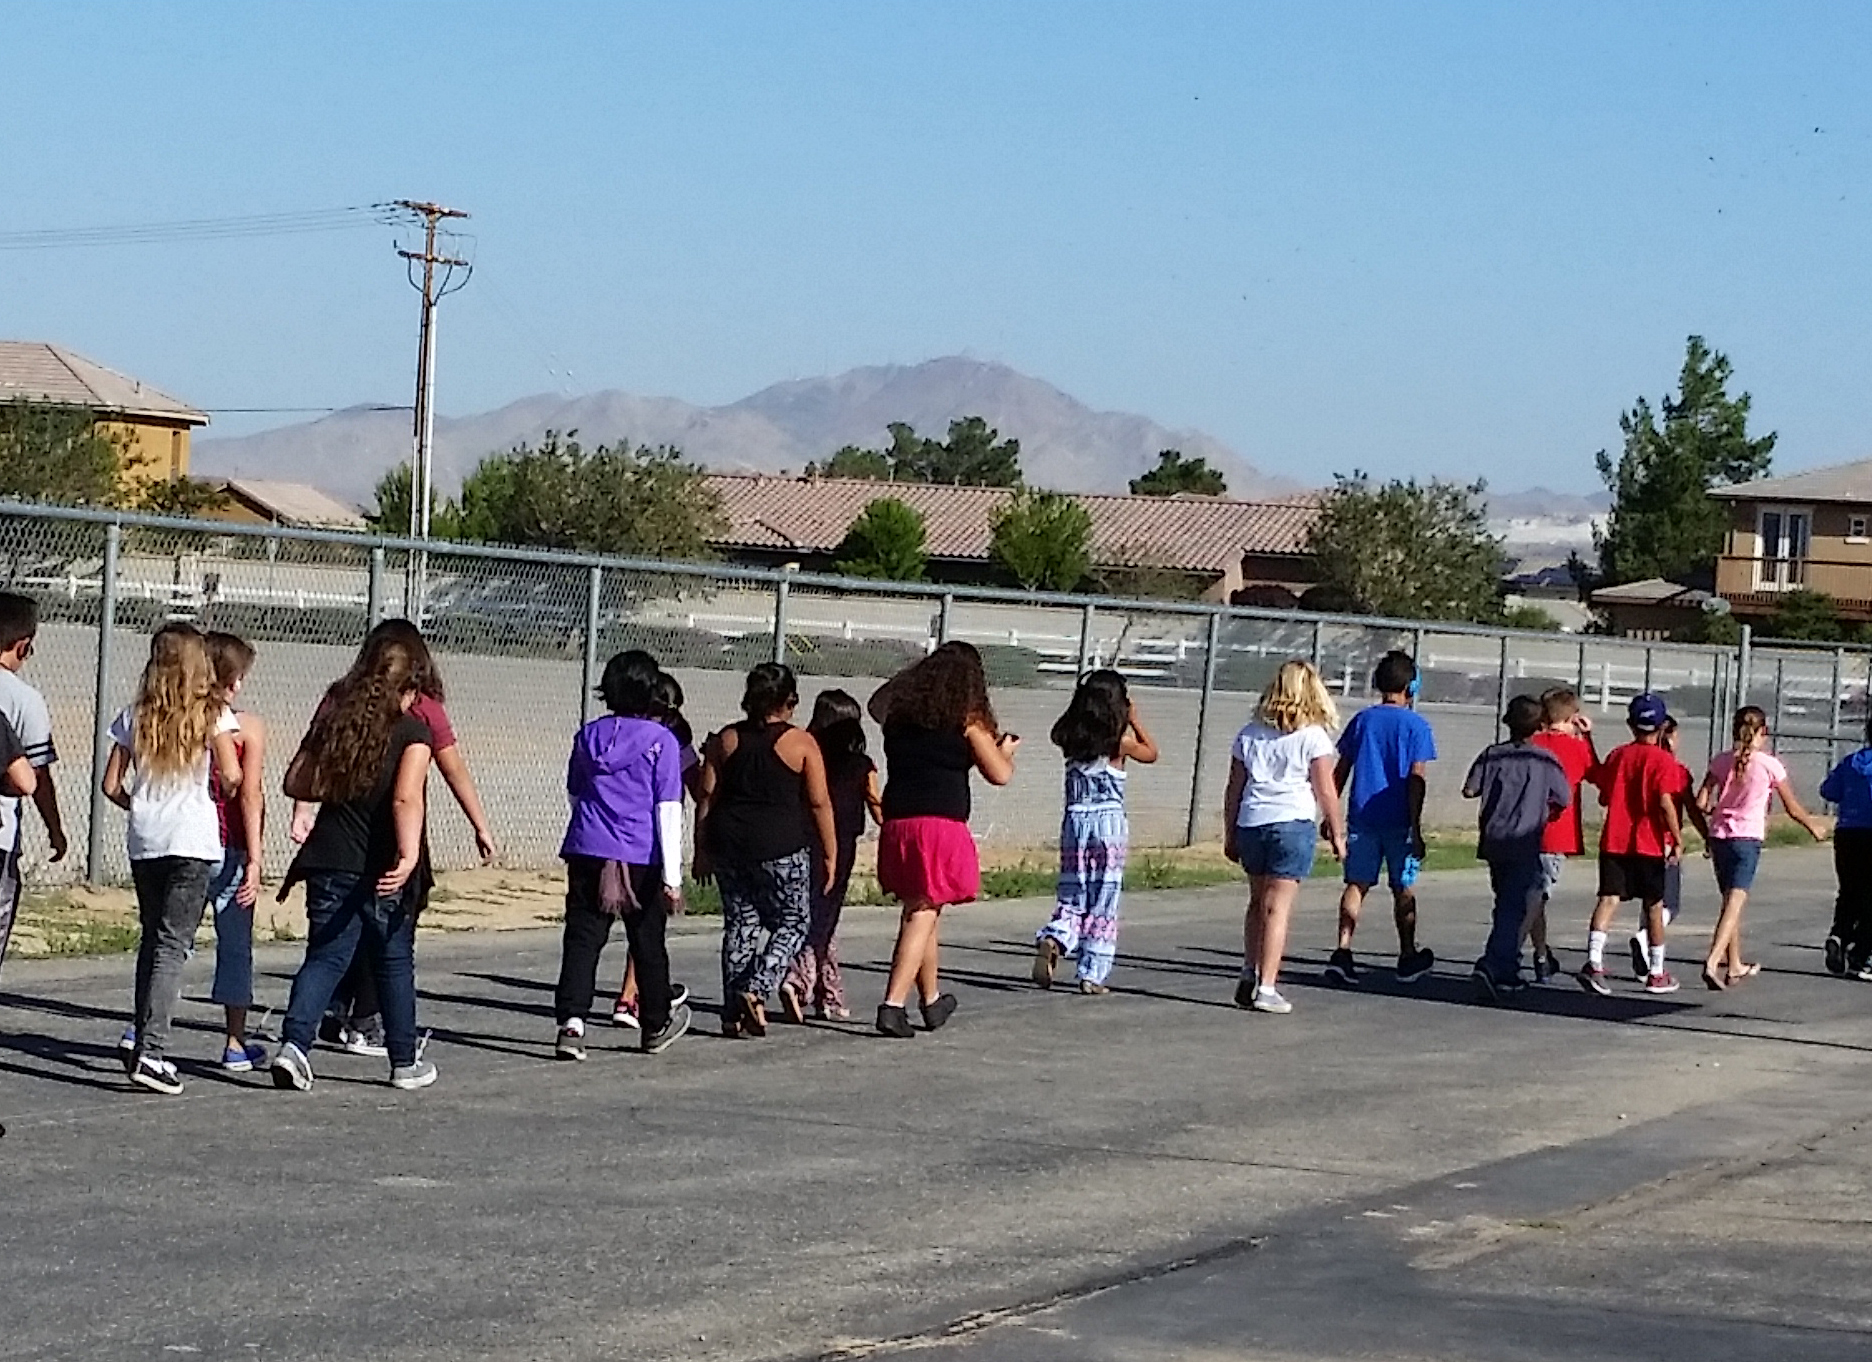 Walking Classroom comes to Sitting Bull Academy - The Walking Classroom